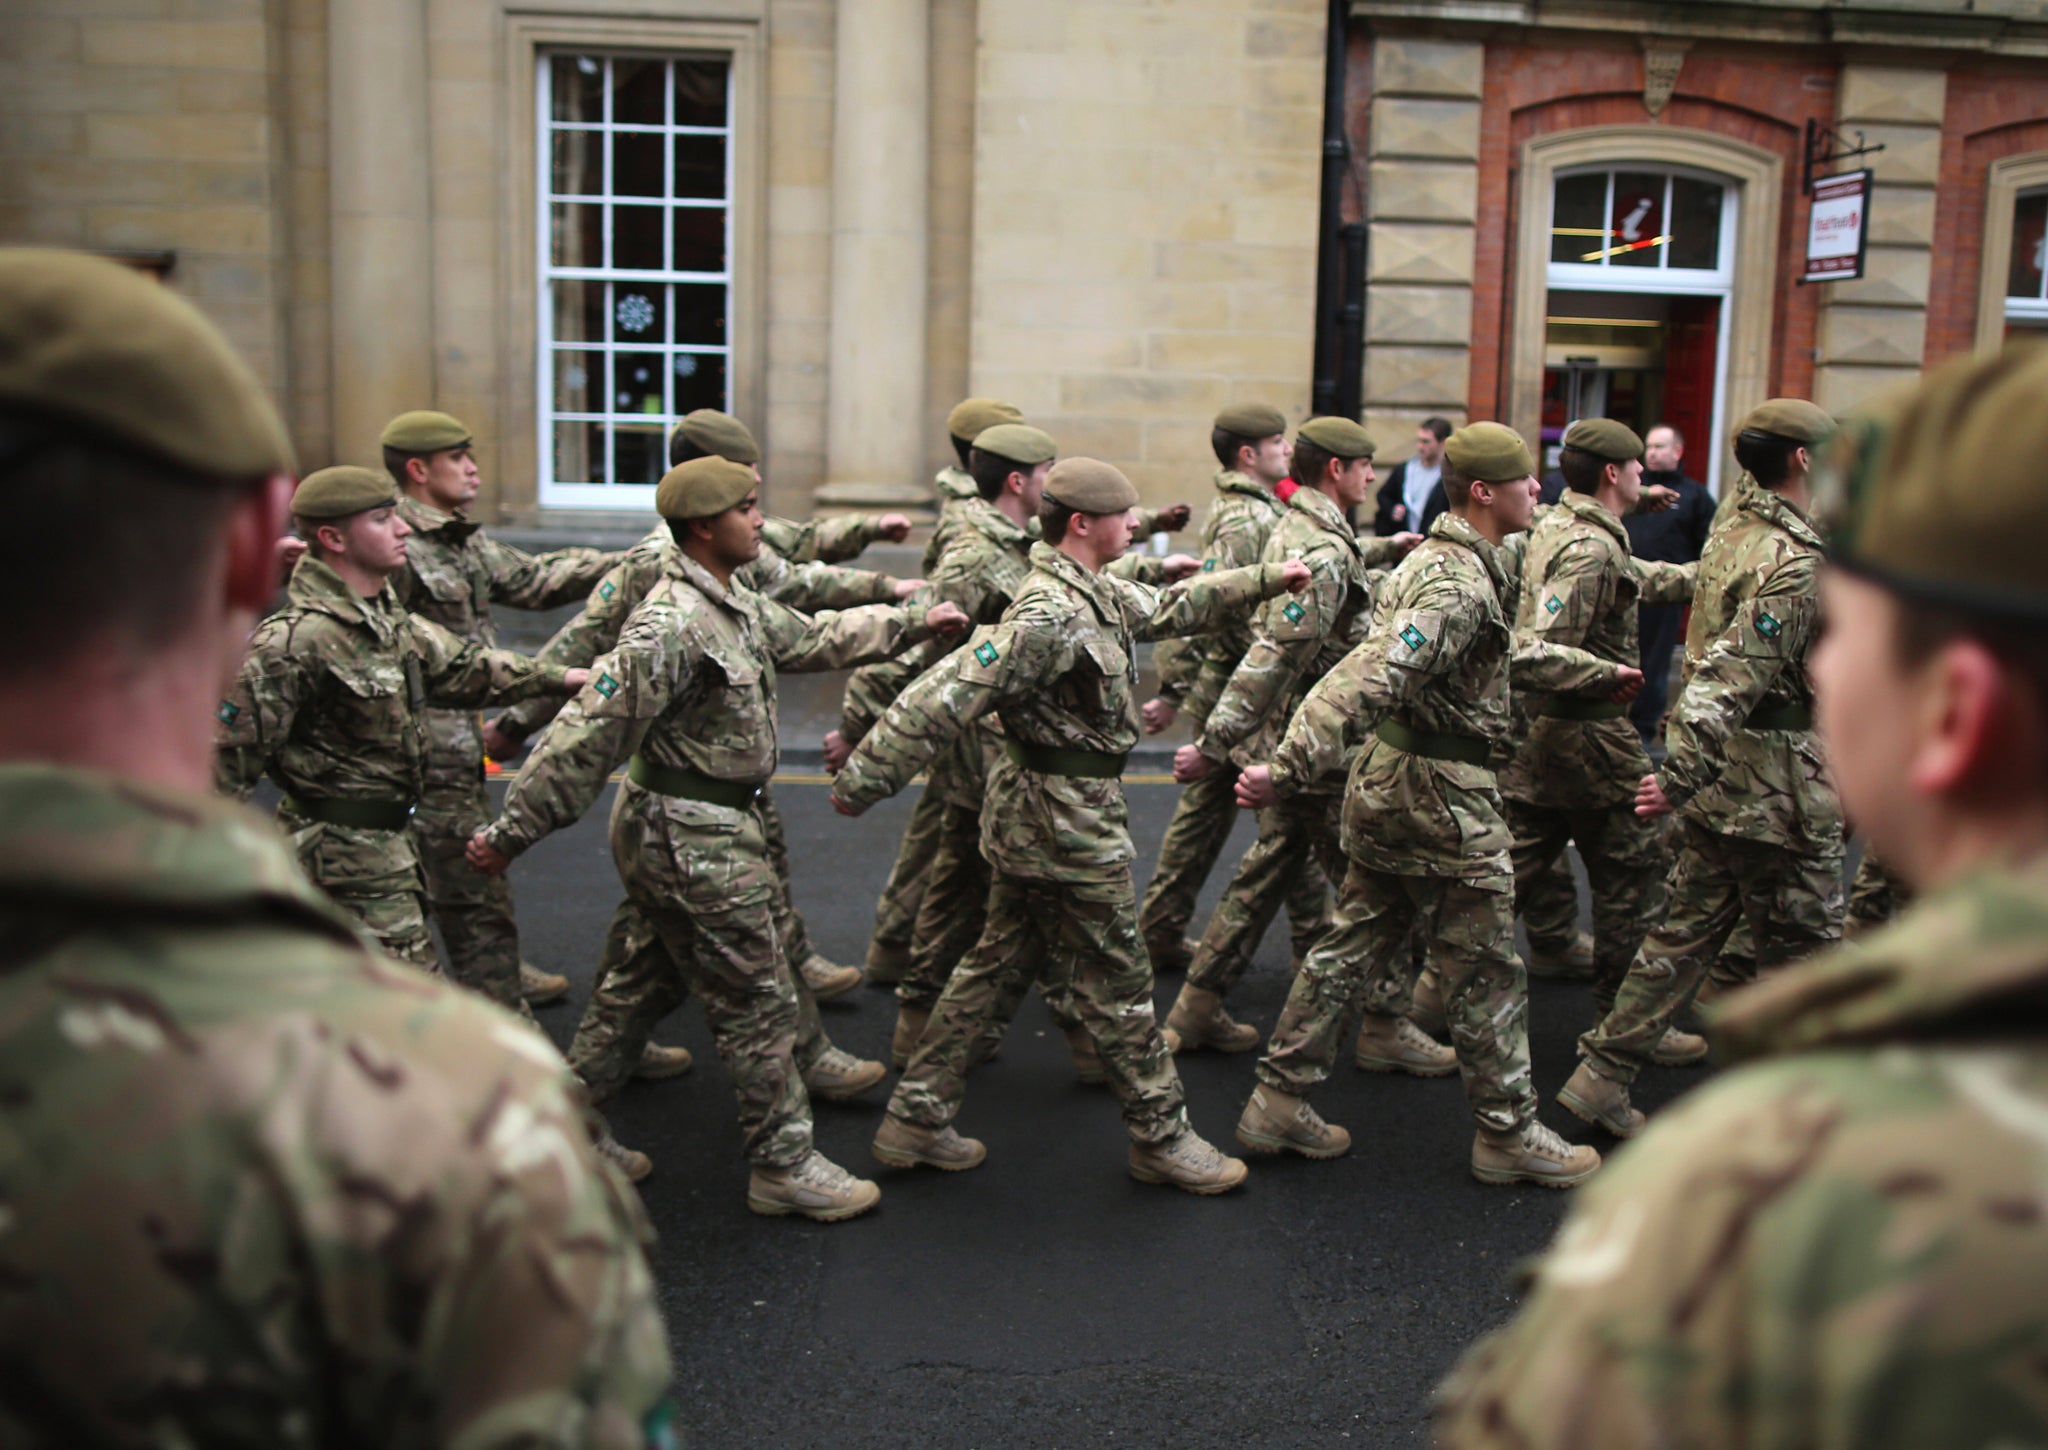 Soldiers from 3rd Battalion The Yorkshire Regiment march through the streets of York during a homecoming parade on December 5, 2012 in York, England.